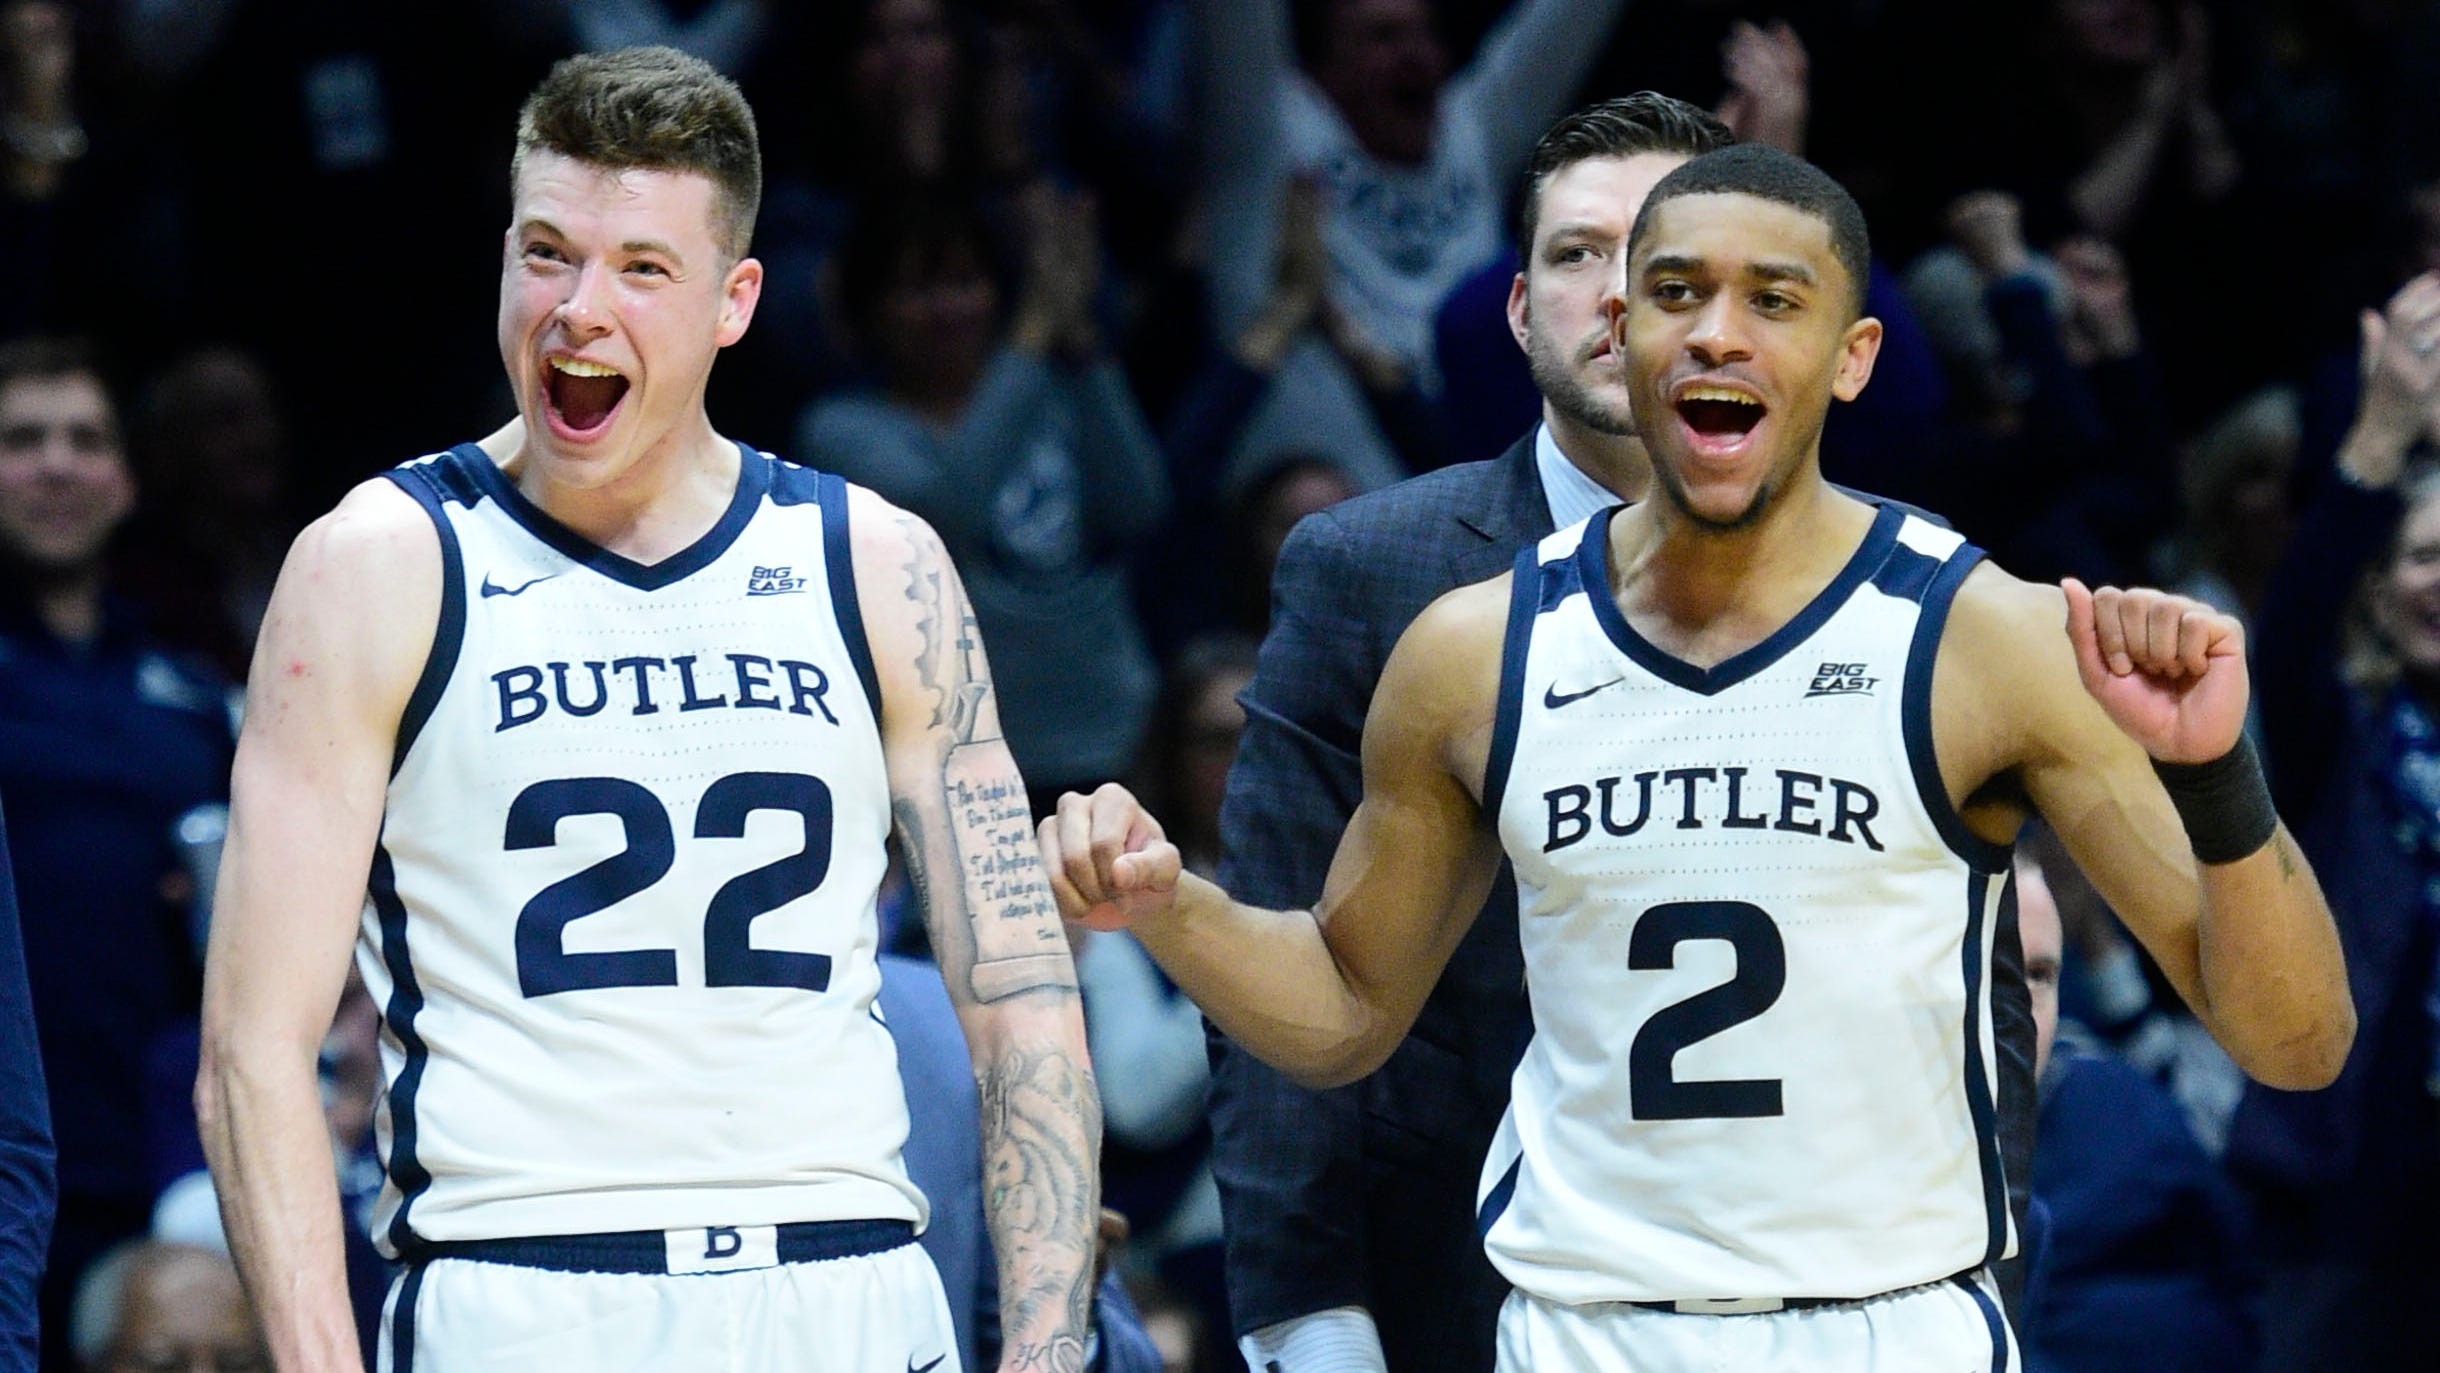 Butler basketball's practice players: All guts, no glory. You won't see their work, but they are